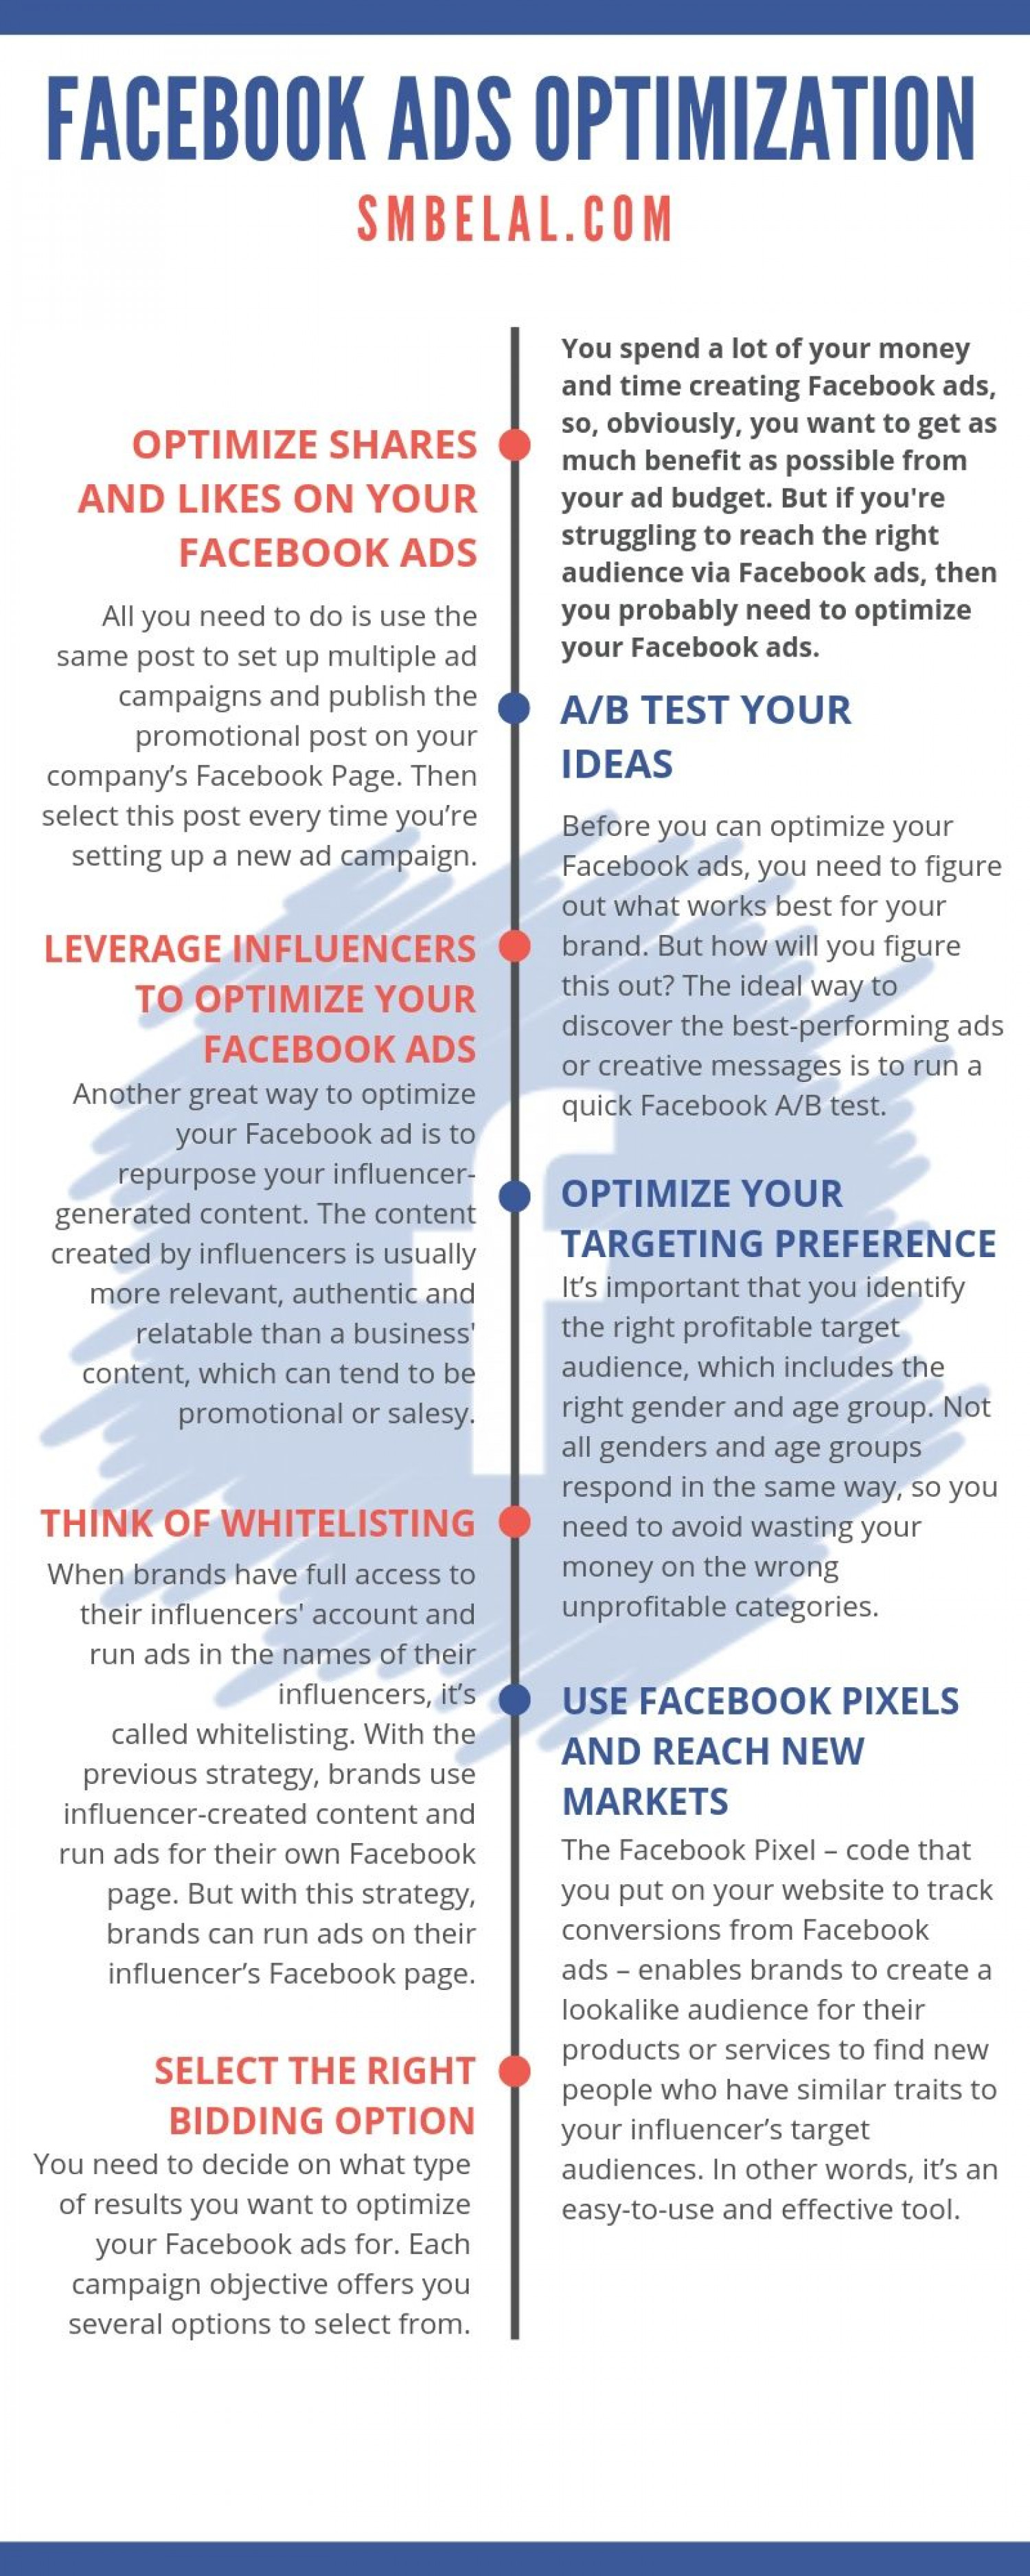 How To Optimize Facebook Ads? Infographic